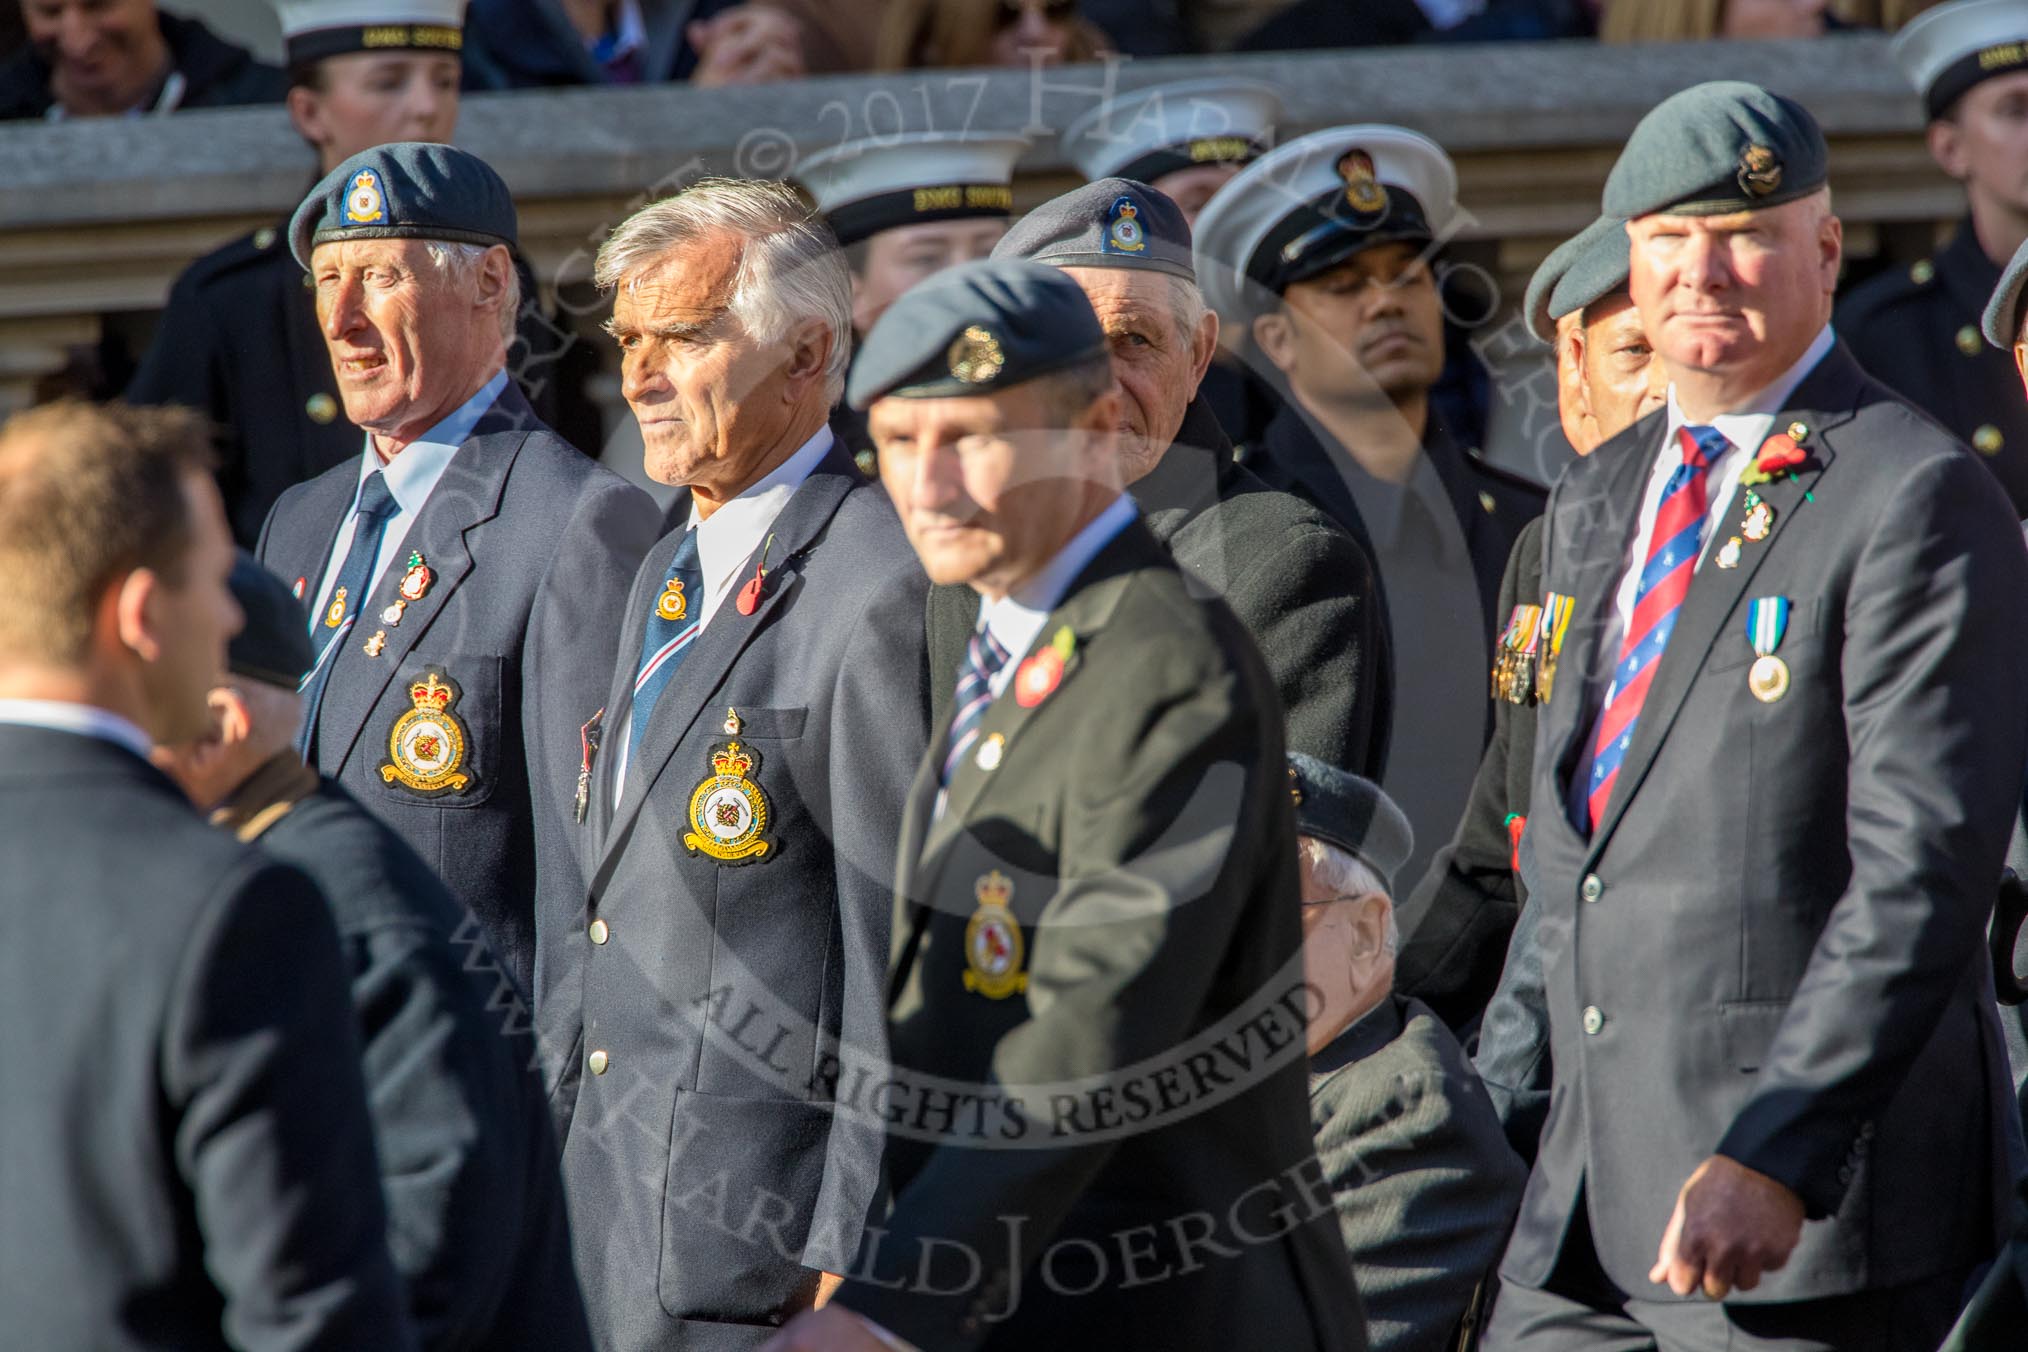 Royal Air Force Mountain Rescue Association (Group C12, 32 members) during the Royal British Legion March Past on Remembrance Sunday at the Cenotaph, Whitehall, Westminster, London, 11 November 2018, 12:16.